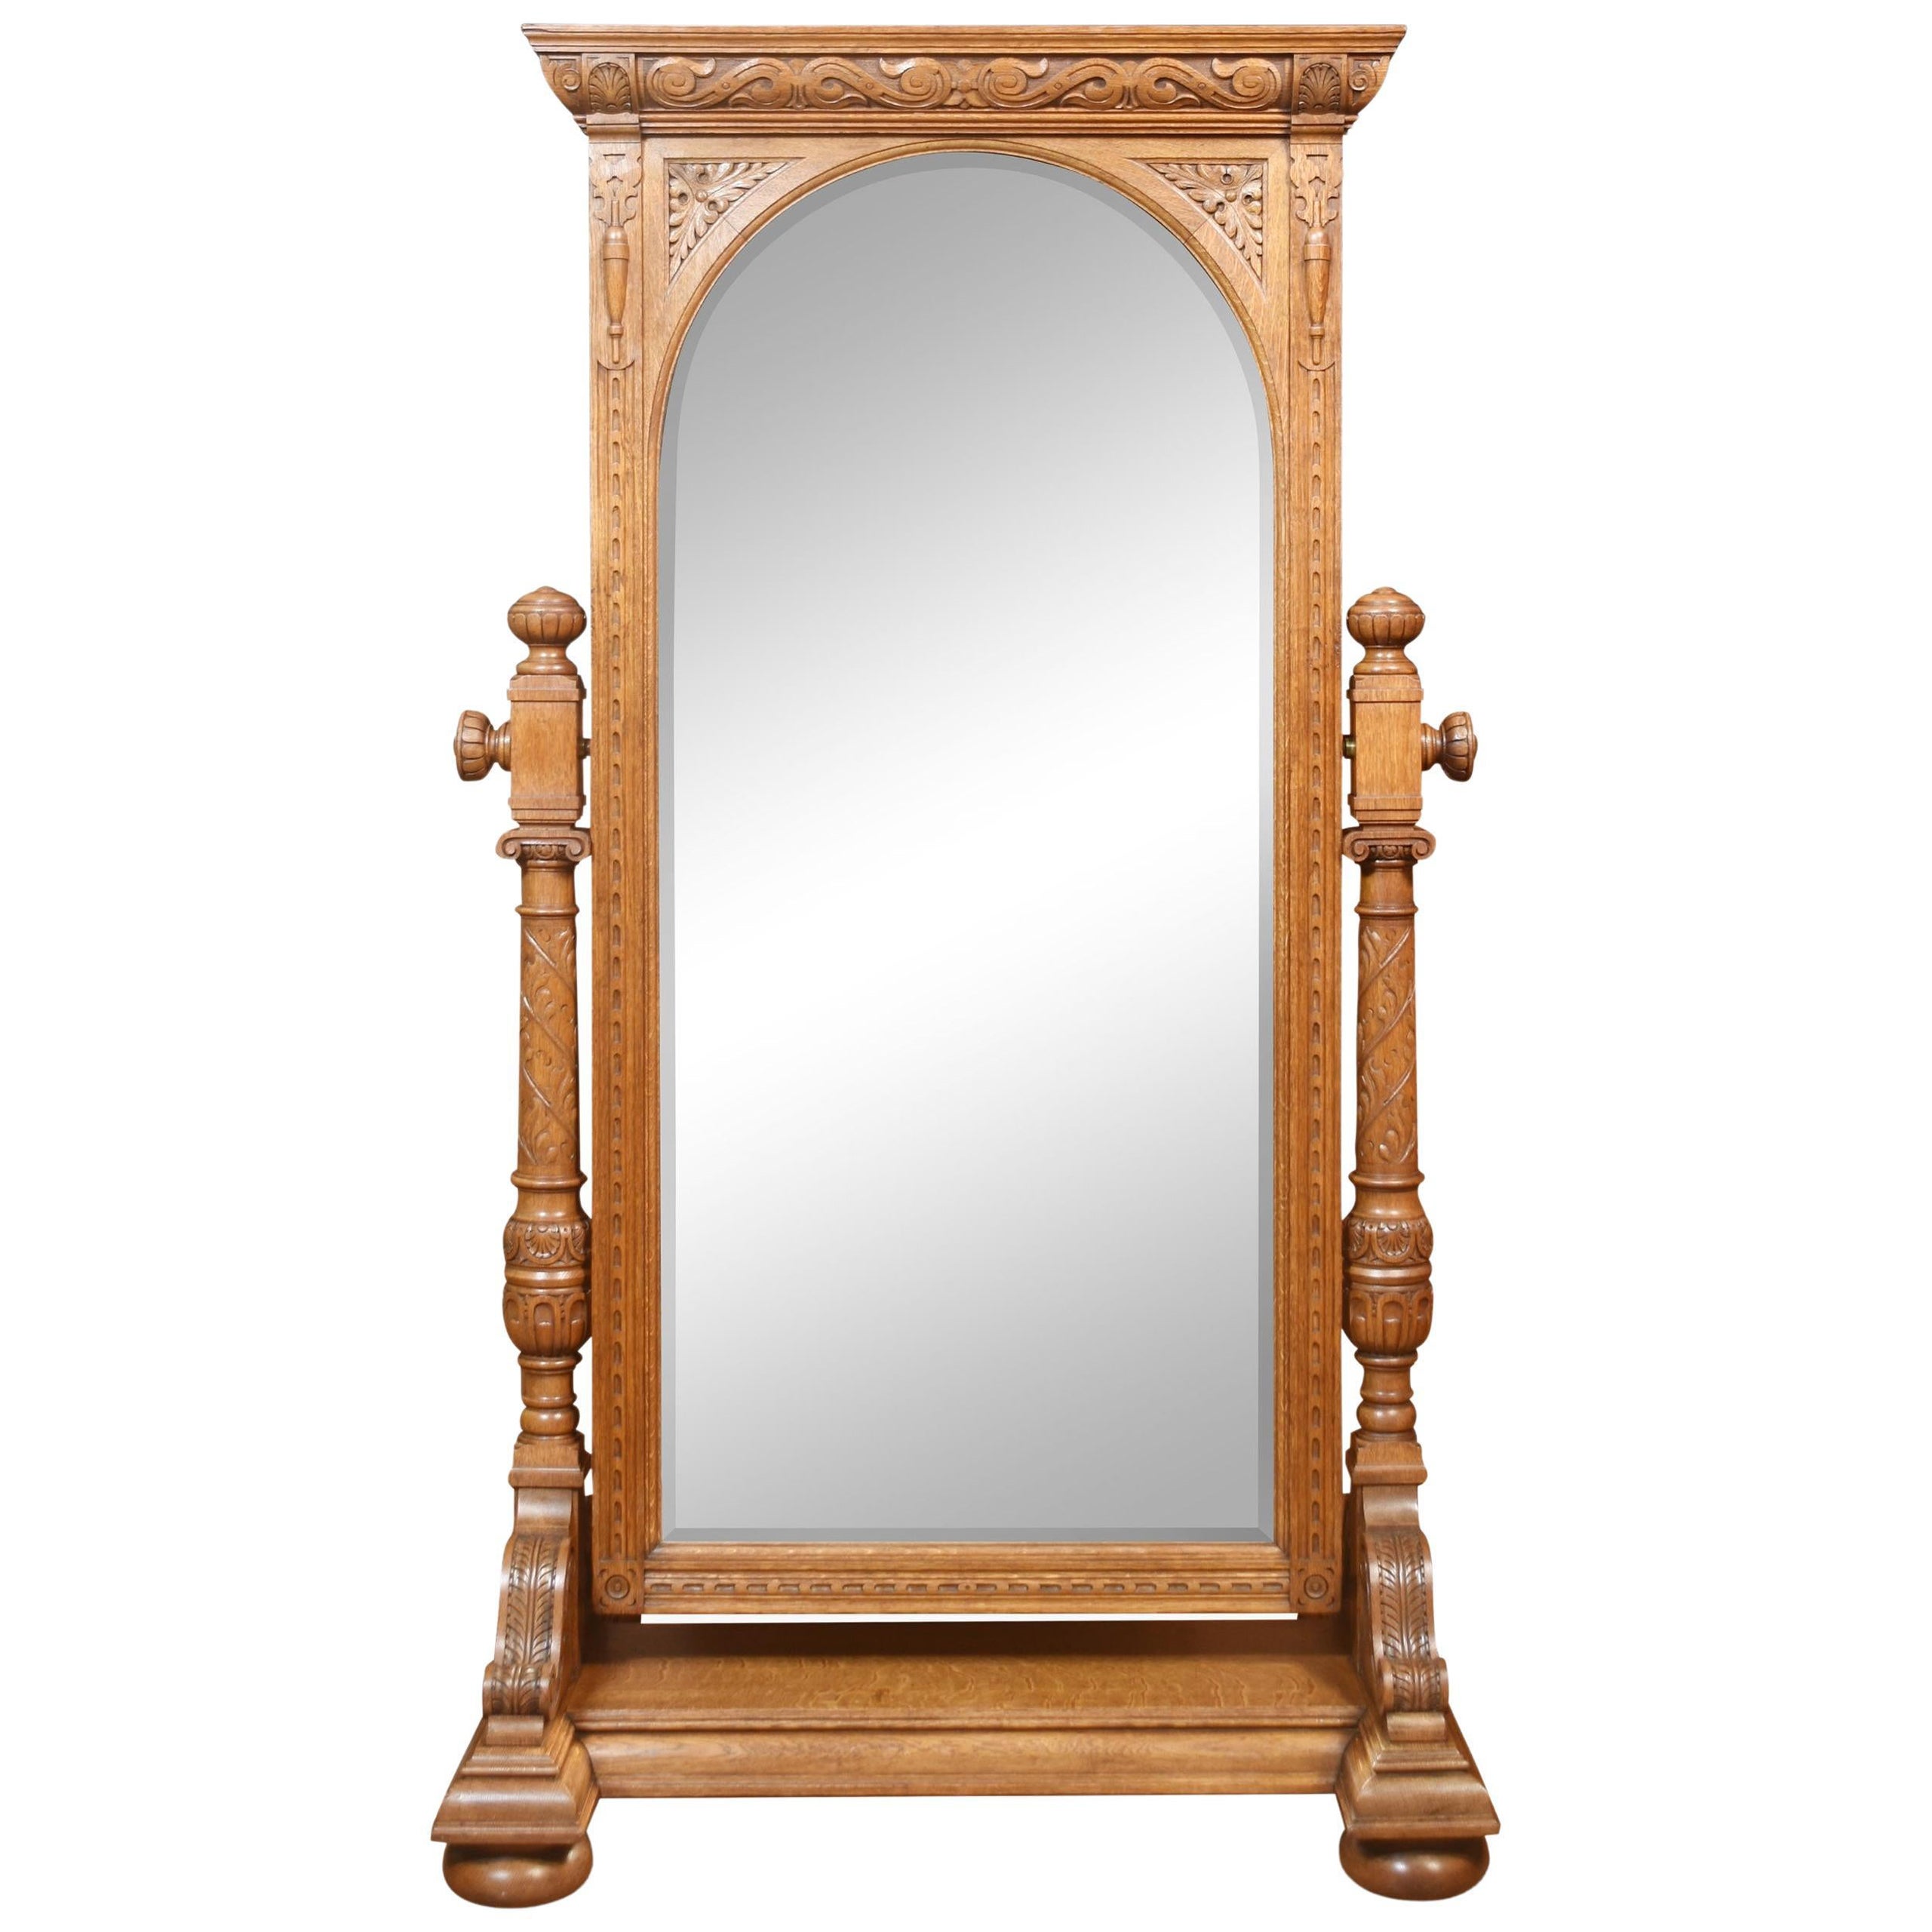 Carved Oak Cheval Mirror